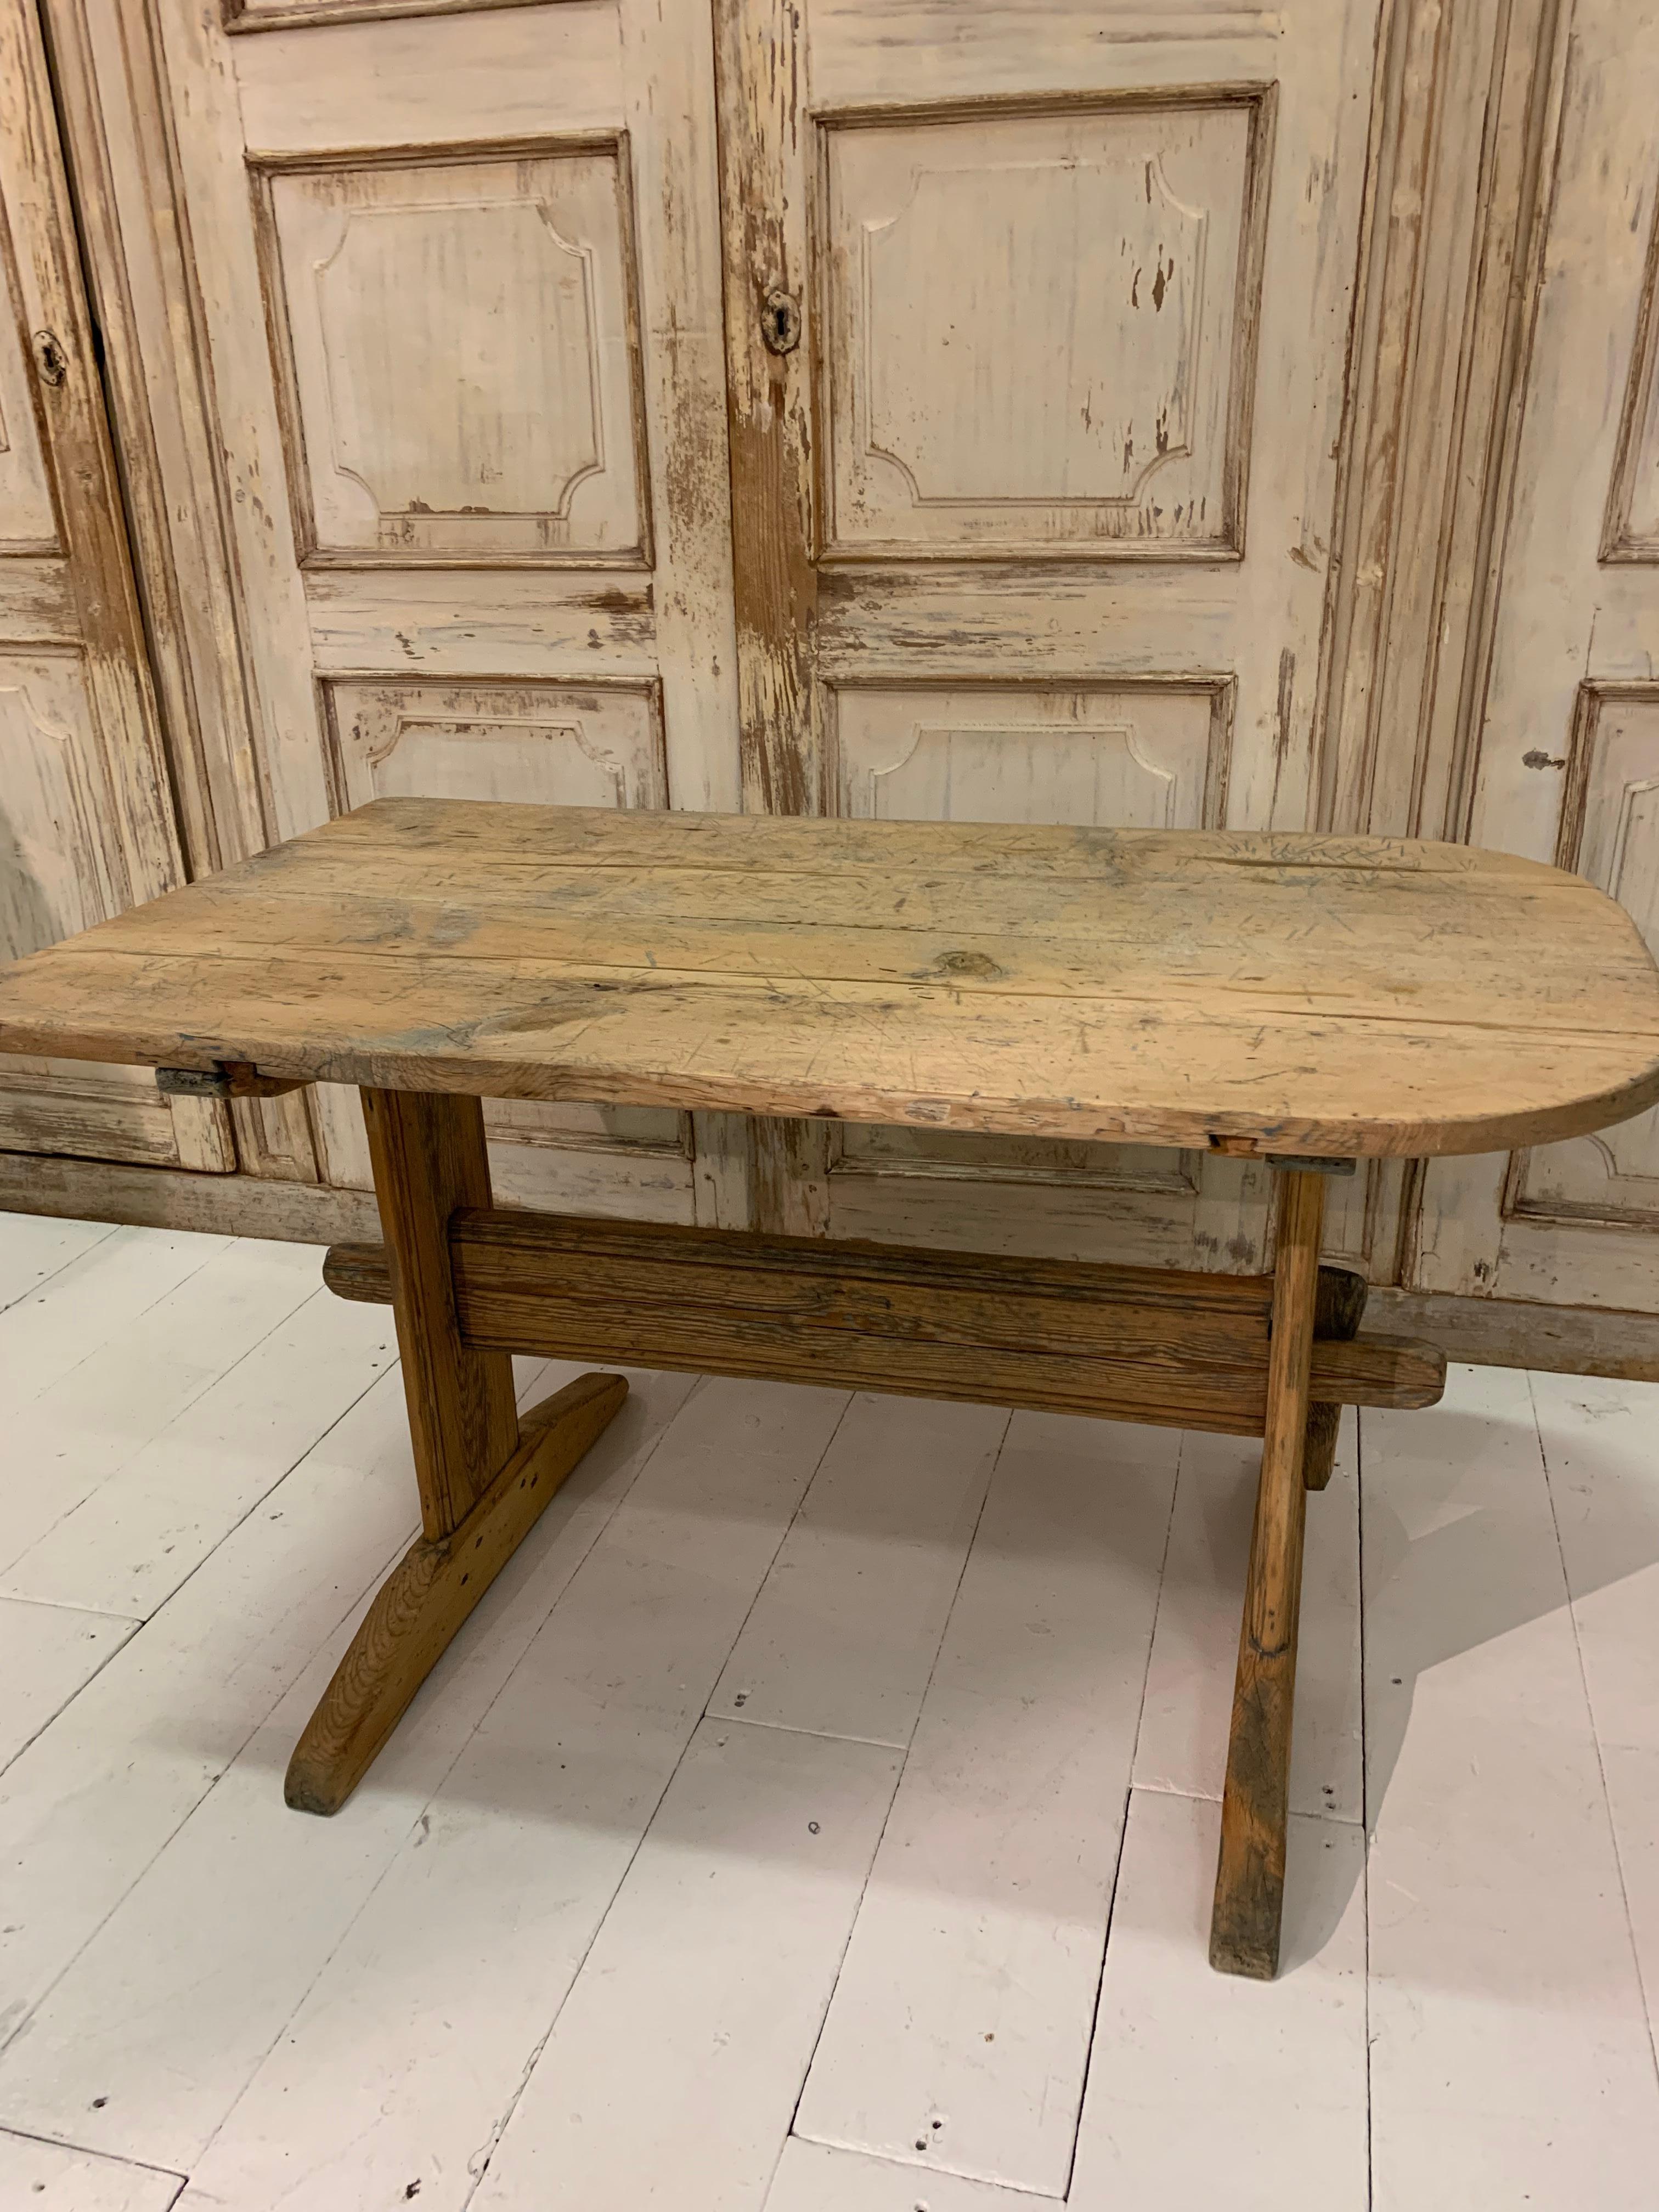 Swedish Country Pine Refectory Table with One Curved End, circa 18th Century For Sale 3